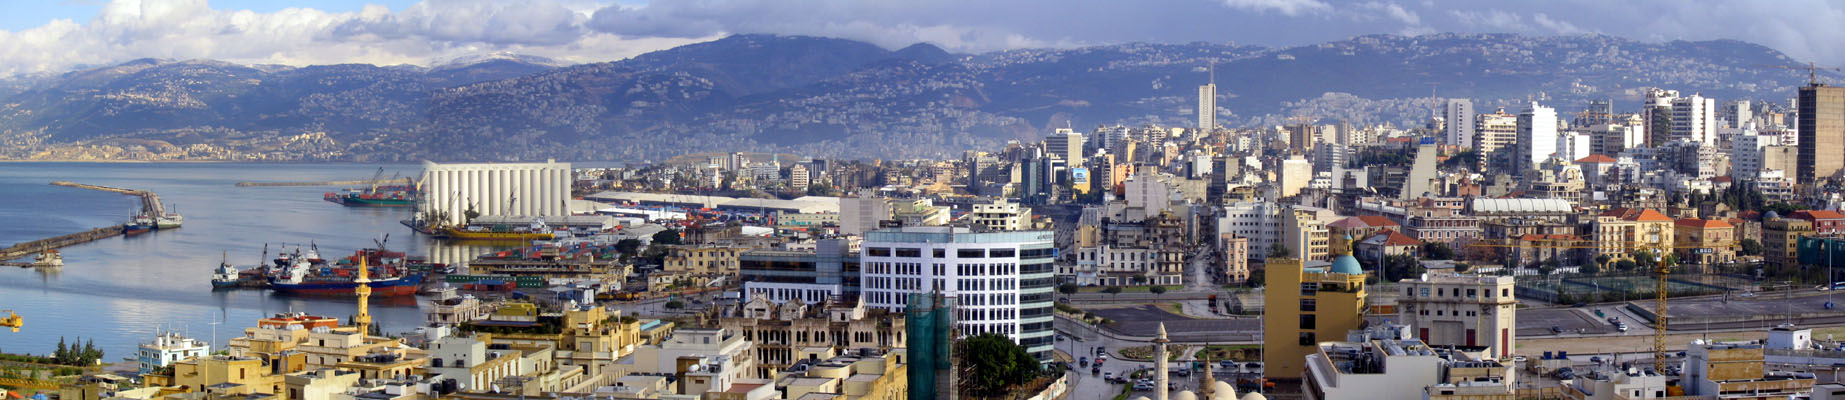 Panoramic view from north to south taken from the St. Louis clock tower, with the Souks Project seen on the left and the tall buildings of the Ashrafieh neighborhood on the right. The Kesrouan and Metn mountains are seen in the background, dotted with villages